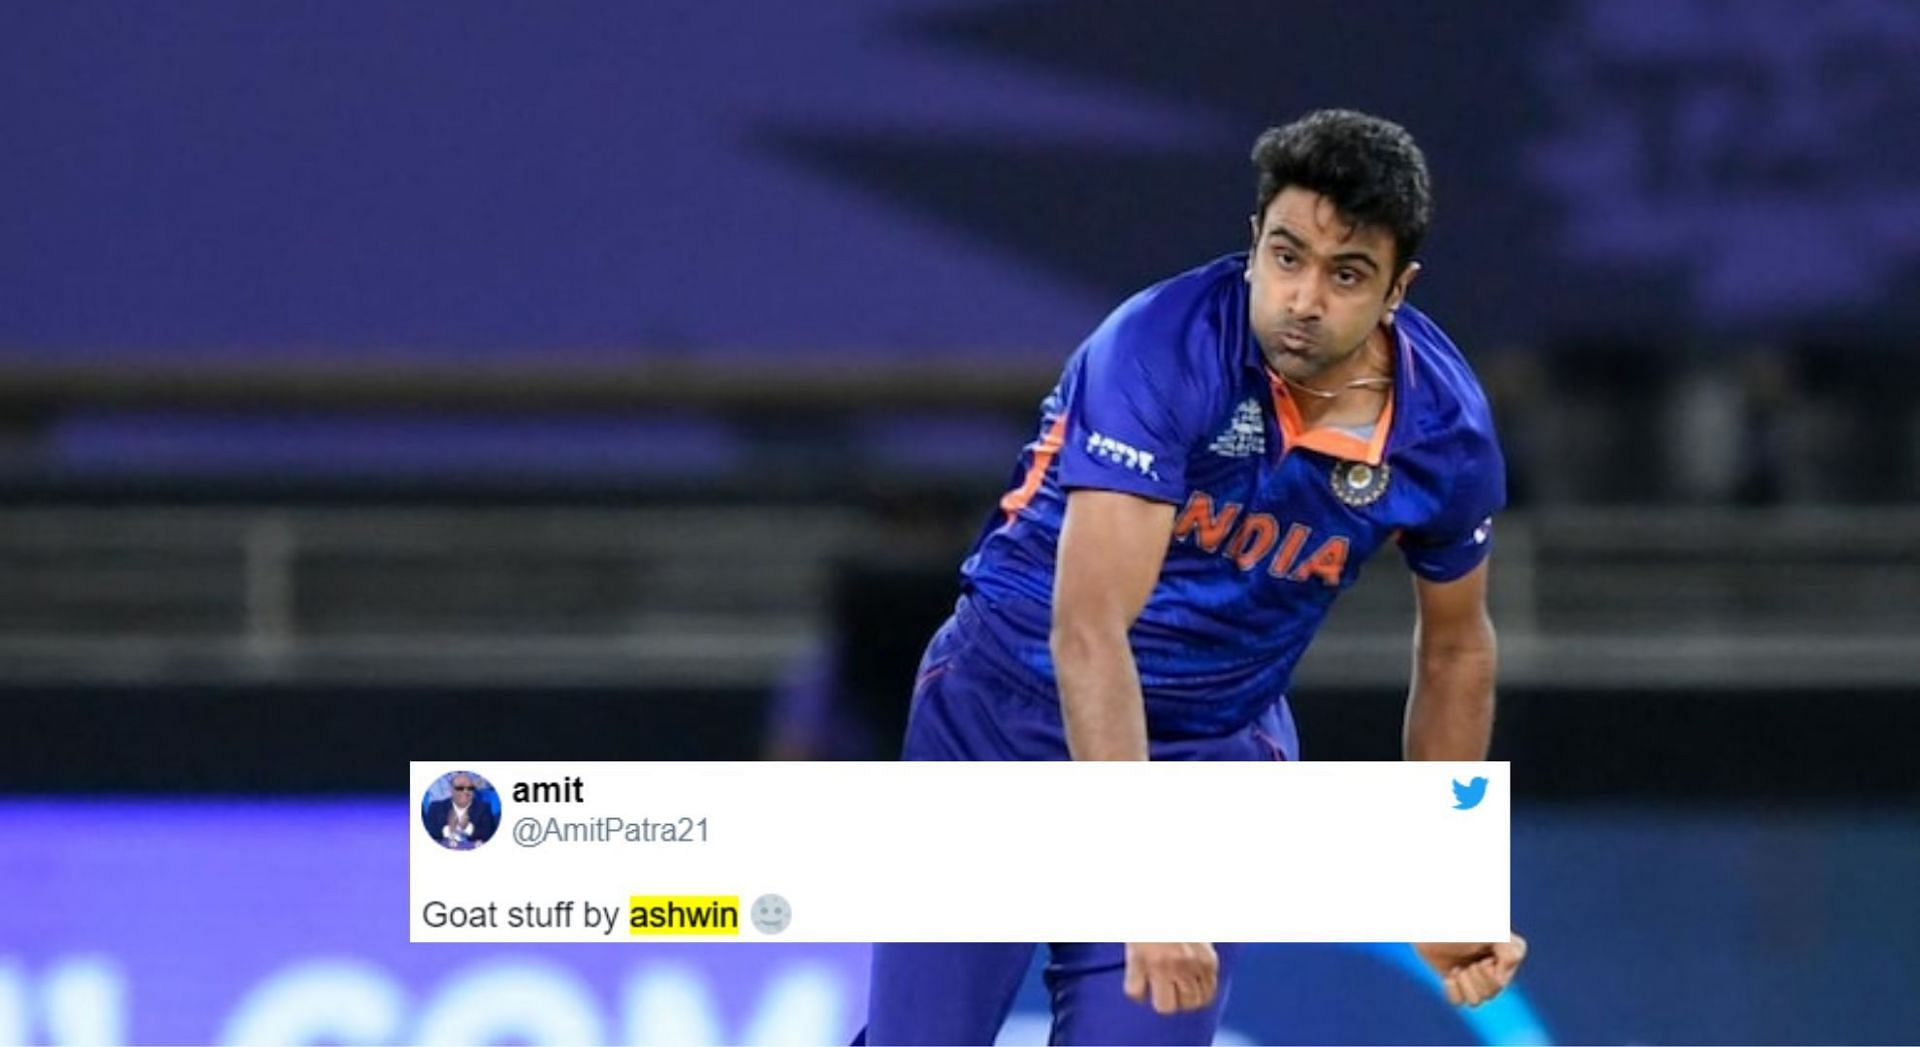 IND vs SA 2022: Fans react after Ashwin's economical spell